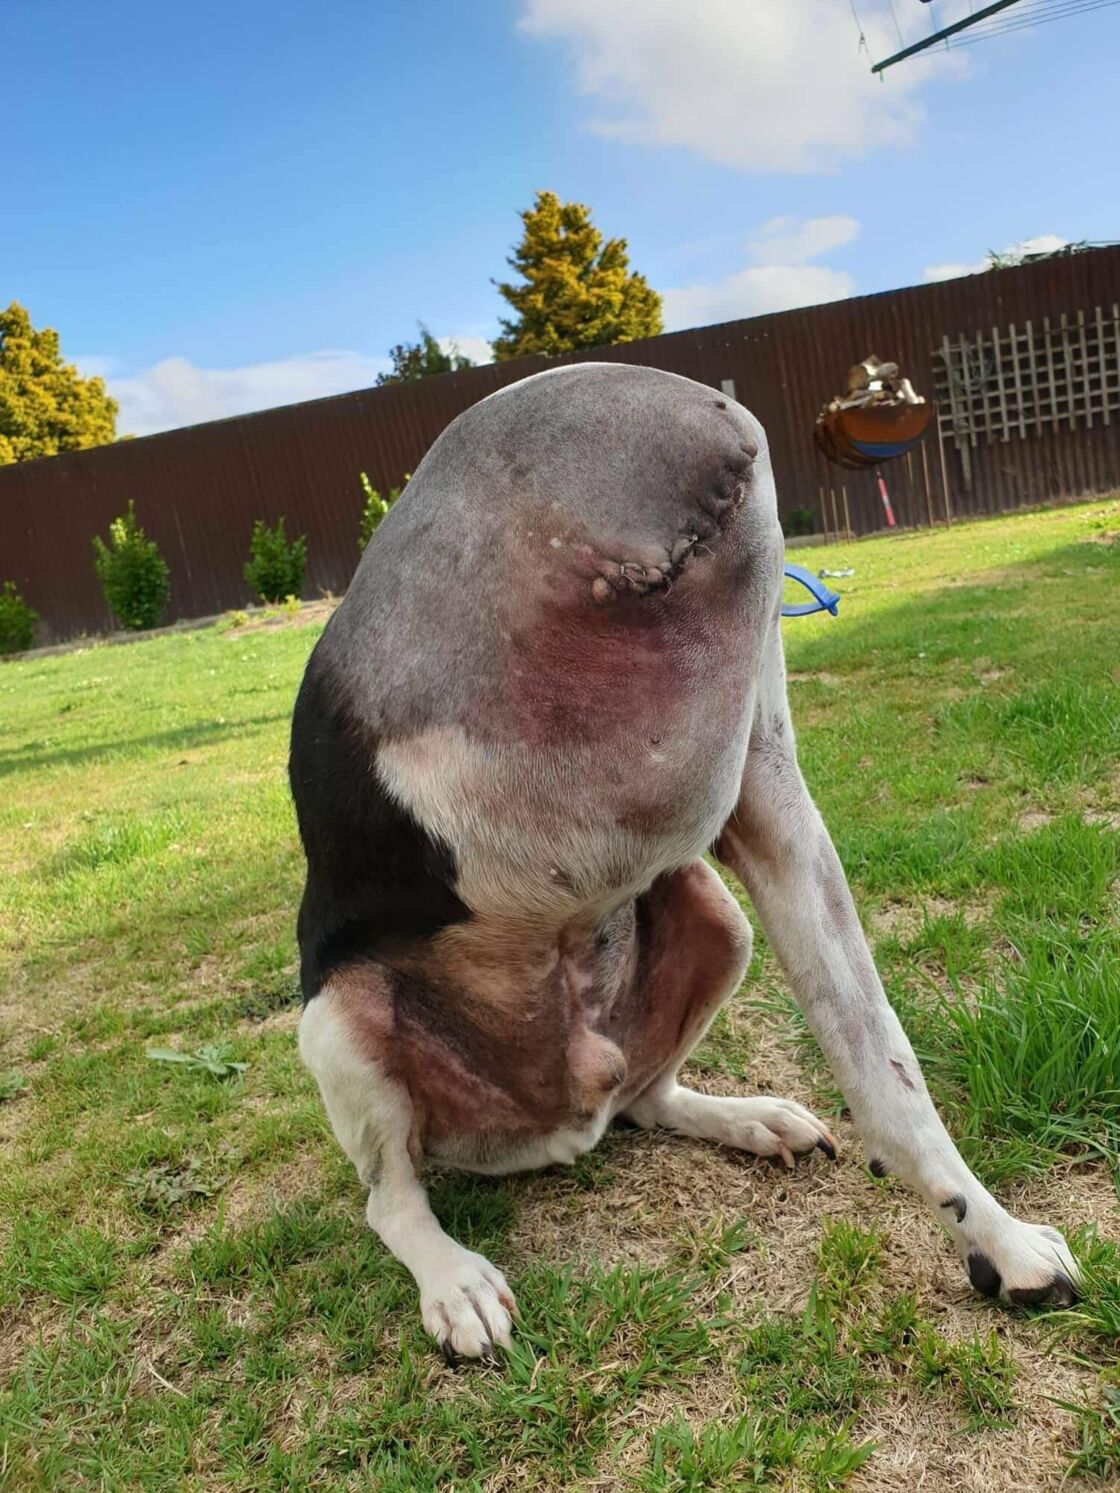 No One Understands What’s Happening in This Photo of a ‘Headless’ Dog